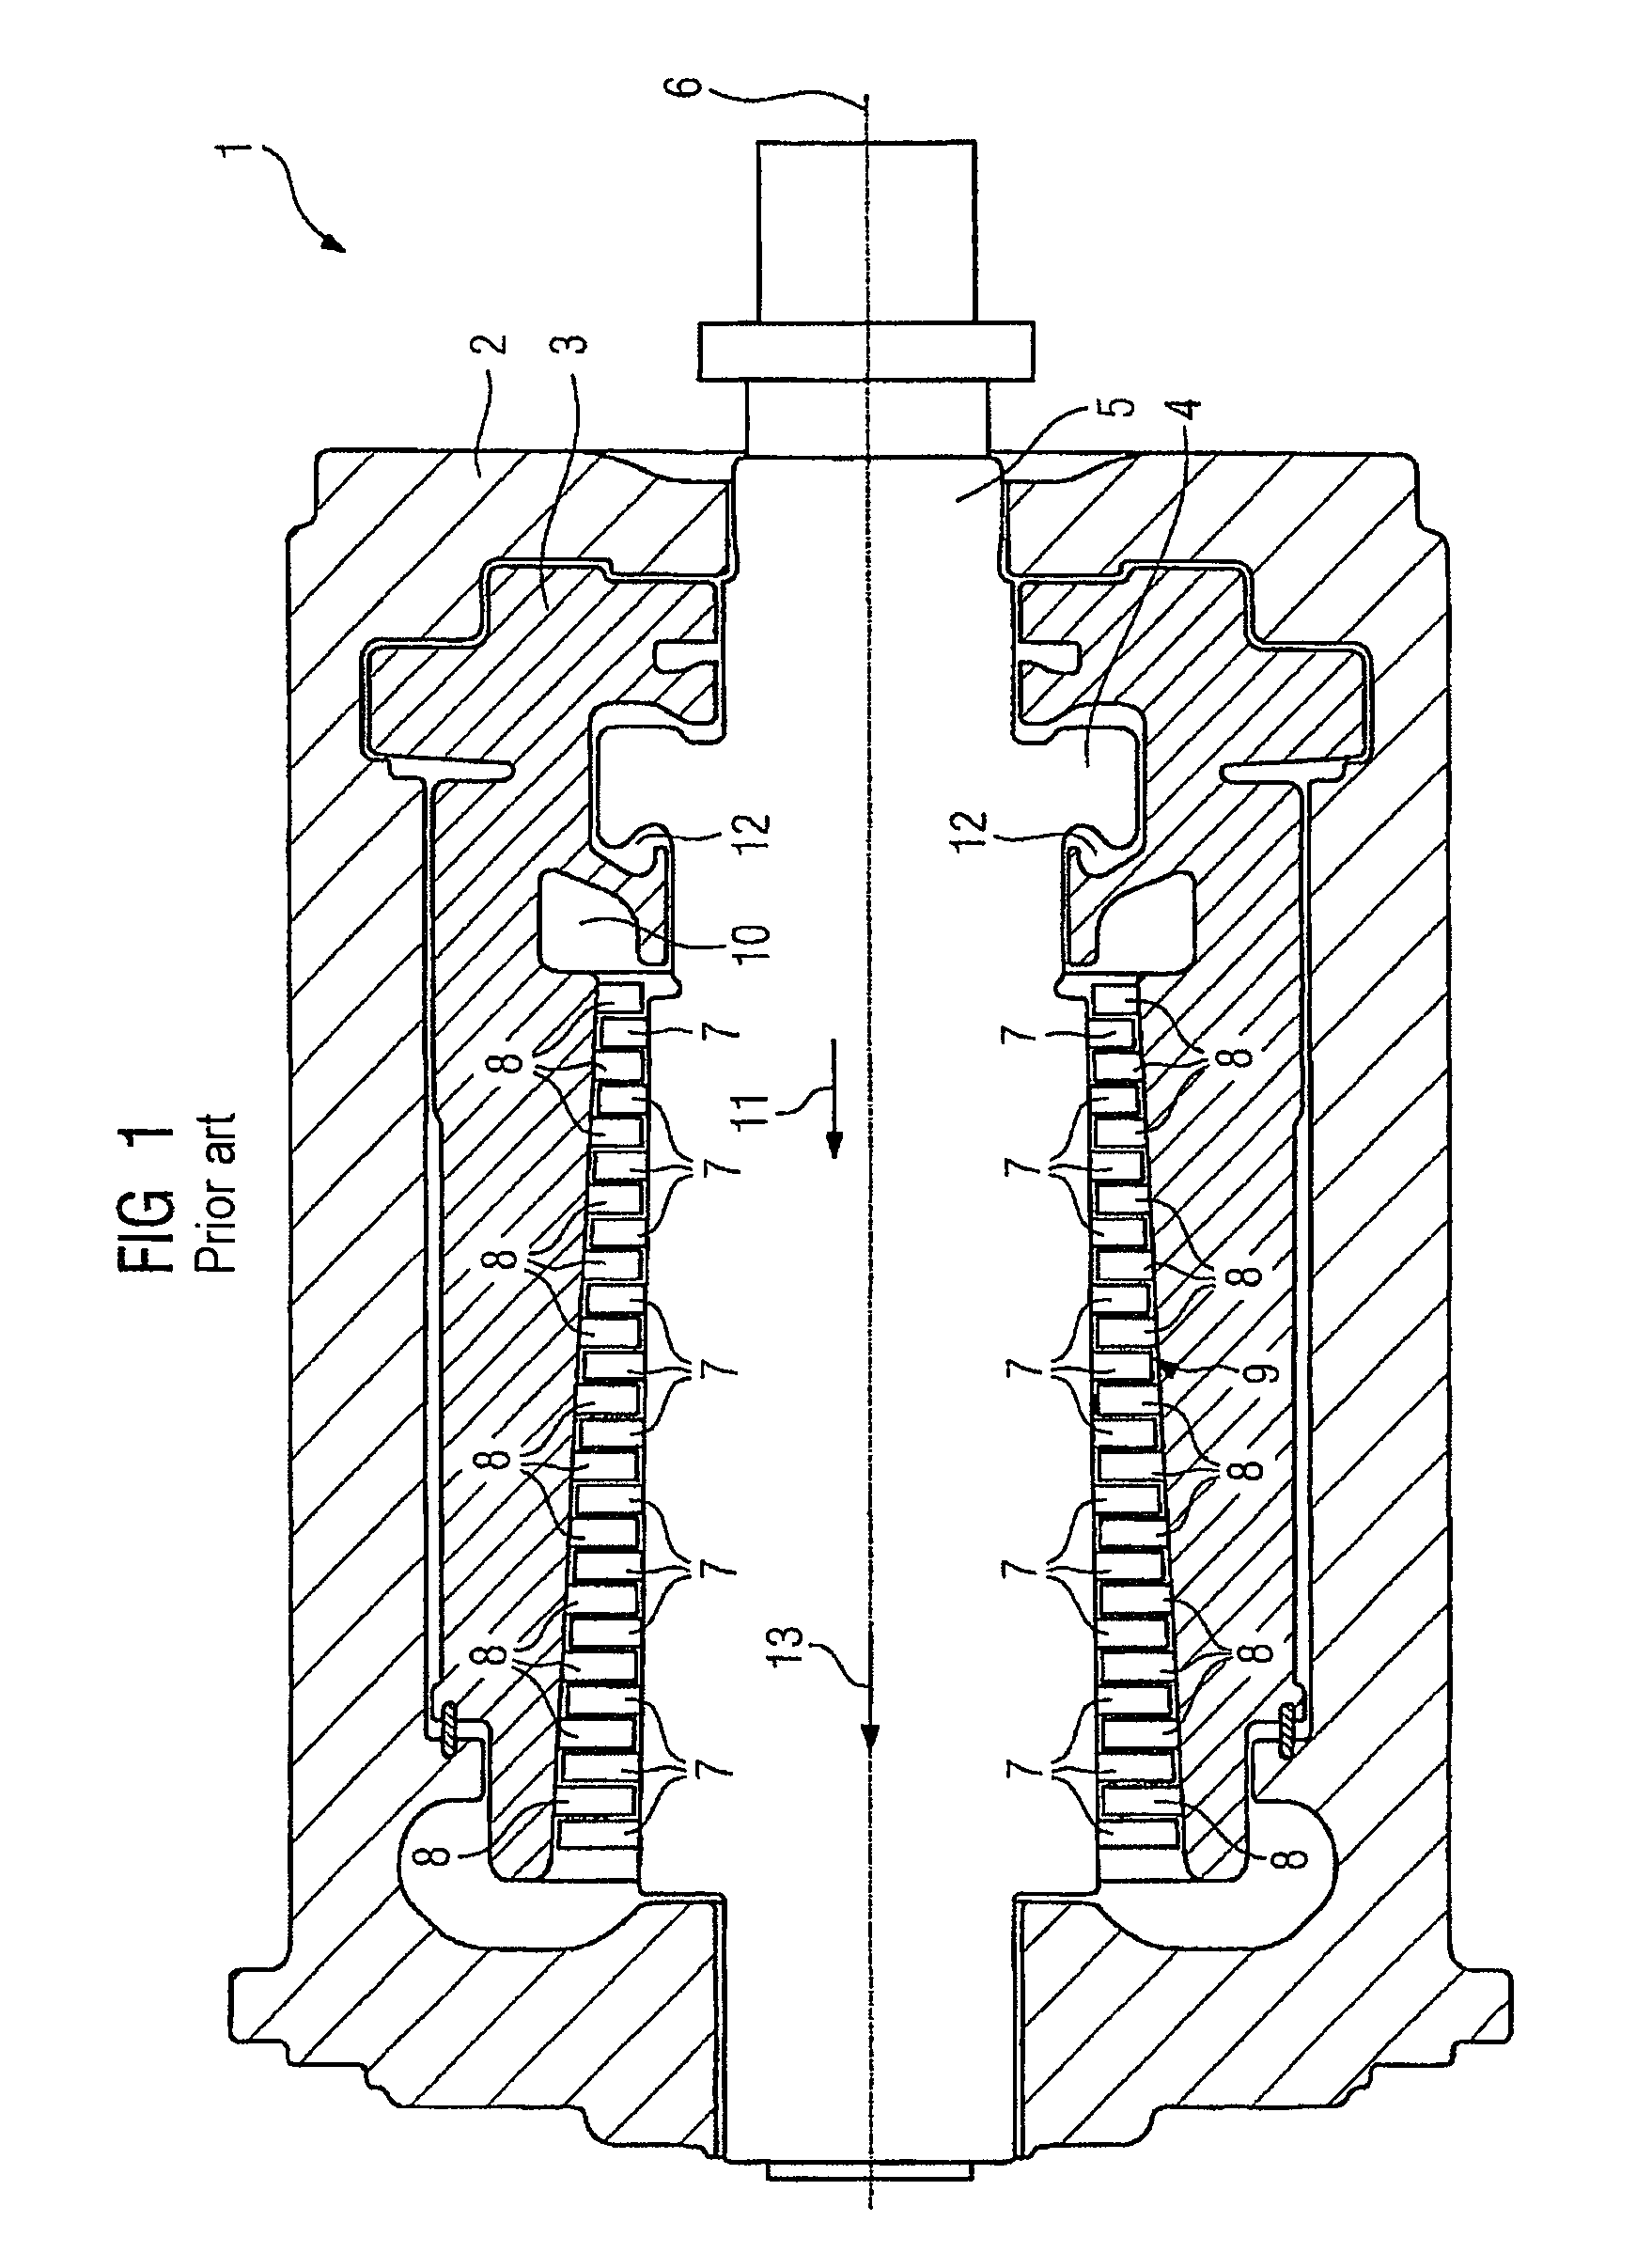 Steam turbine and method for operation of a steam turbine